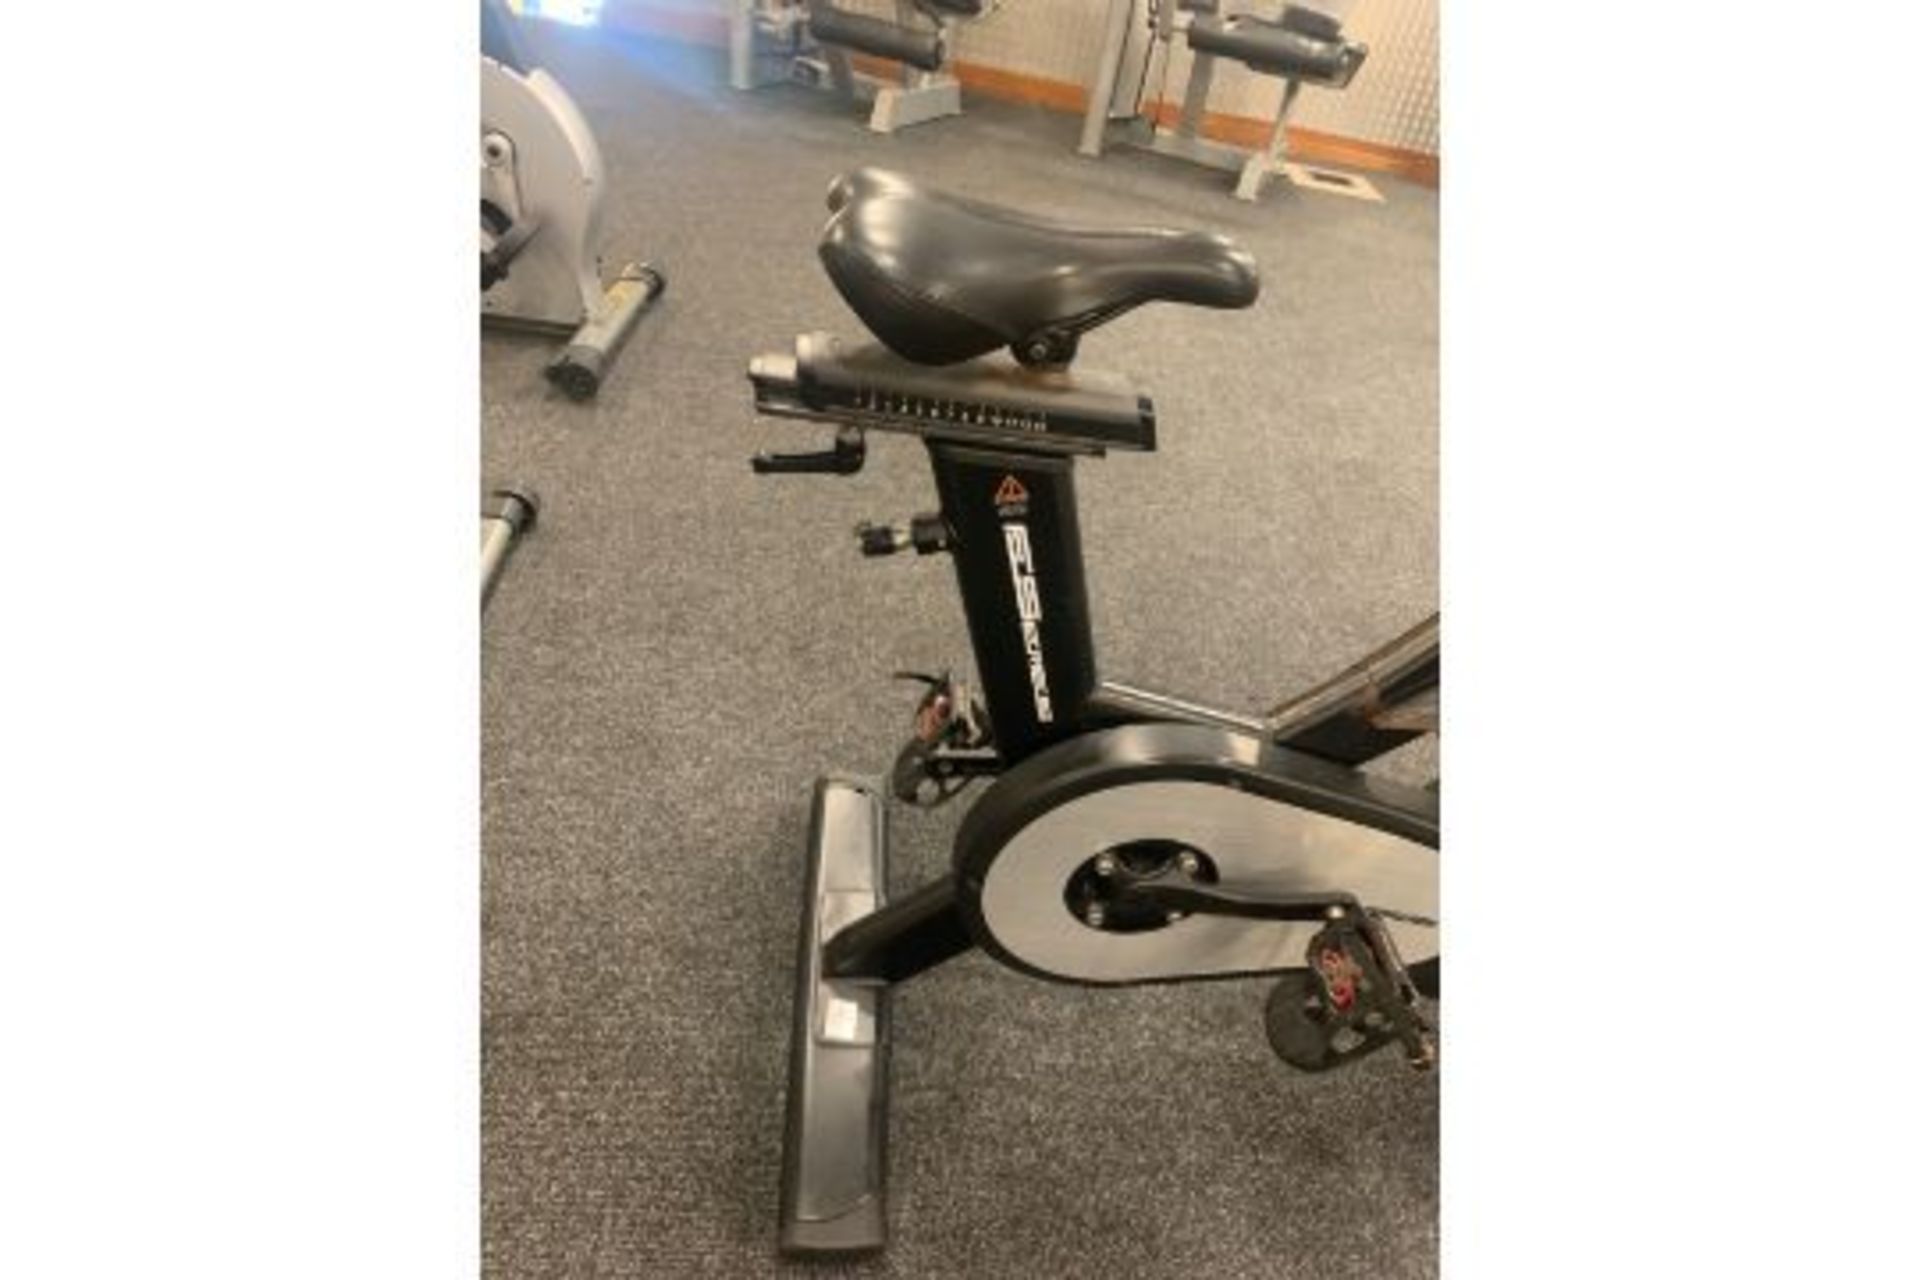 F Series Spin Bike - Image 4 of 4